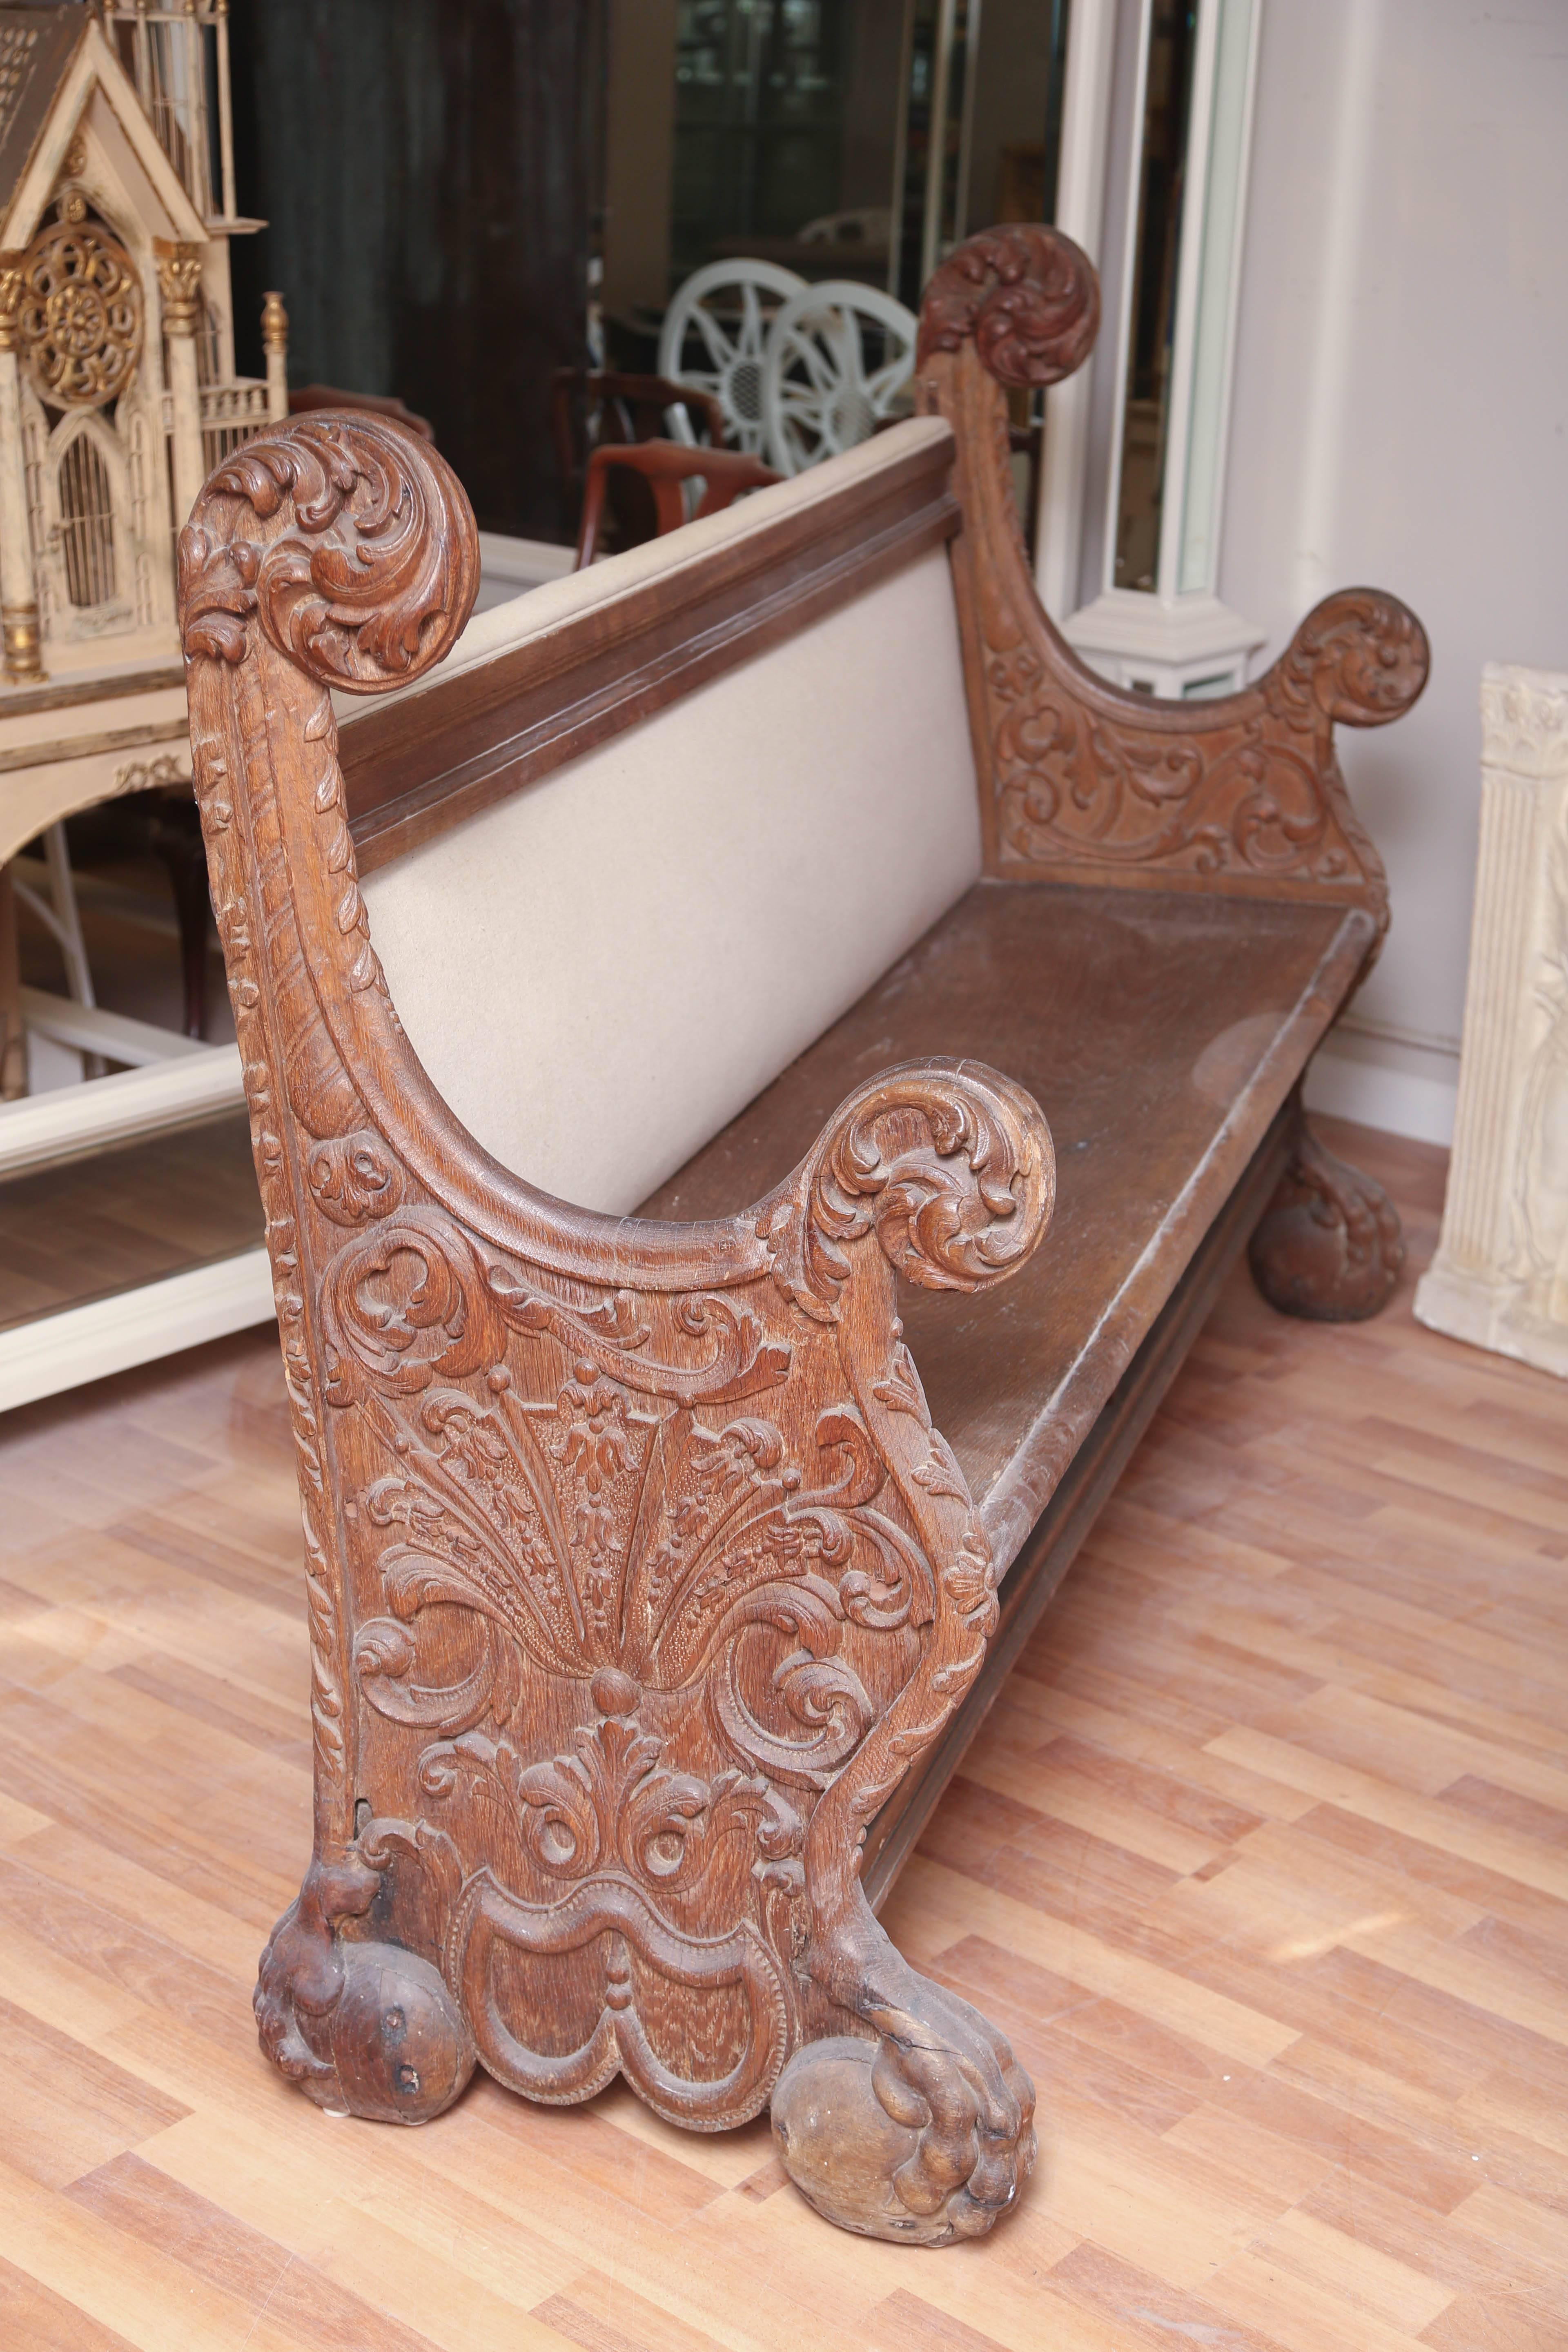 Constructed of oak with great carvings on each end. Back has been upholstered or comfort.